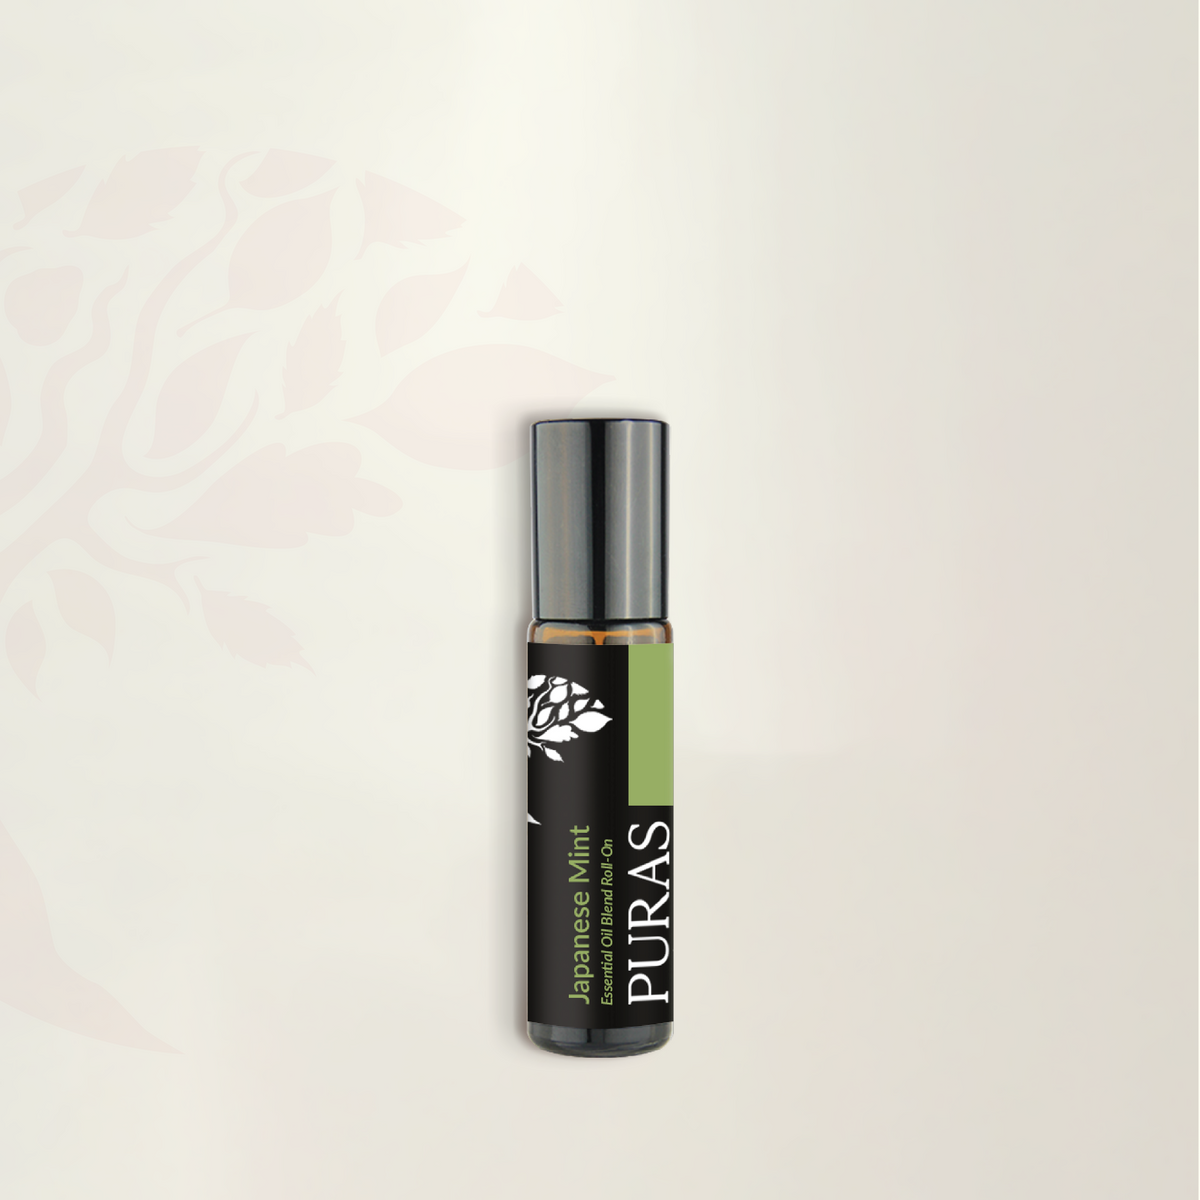 Japanese Mint Essential Oil (Roll-on)